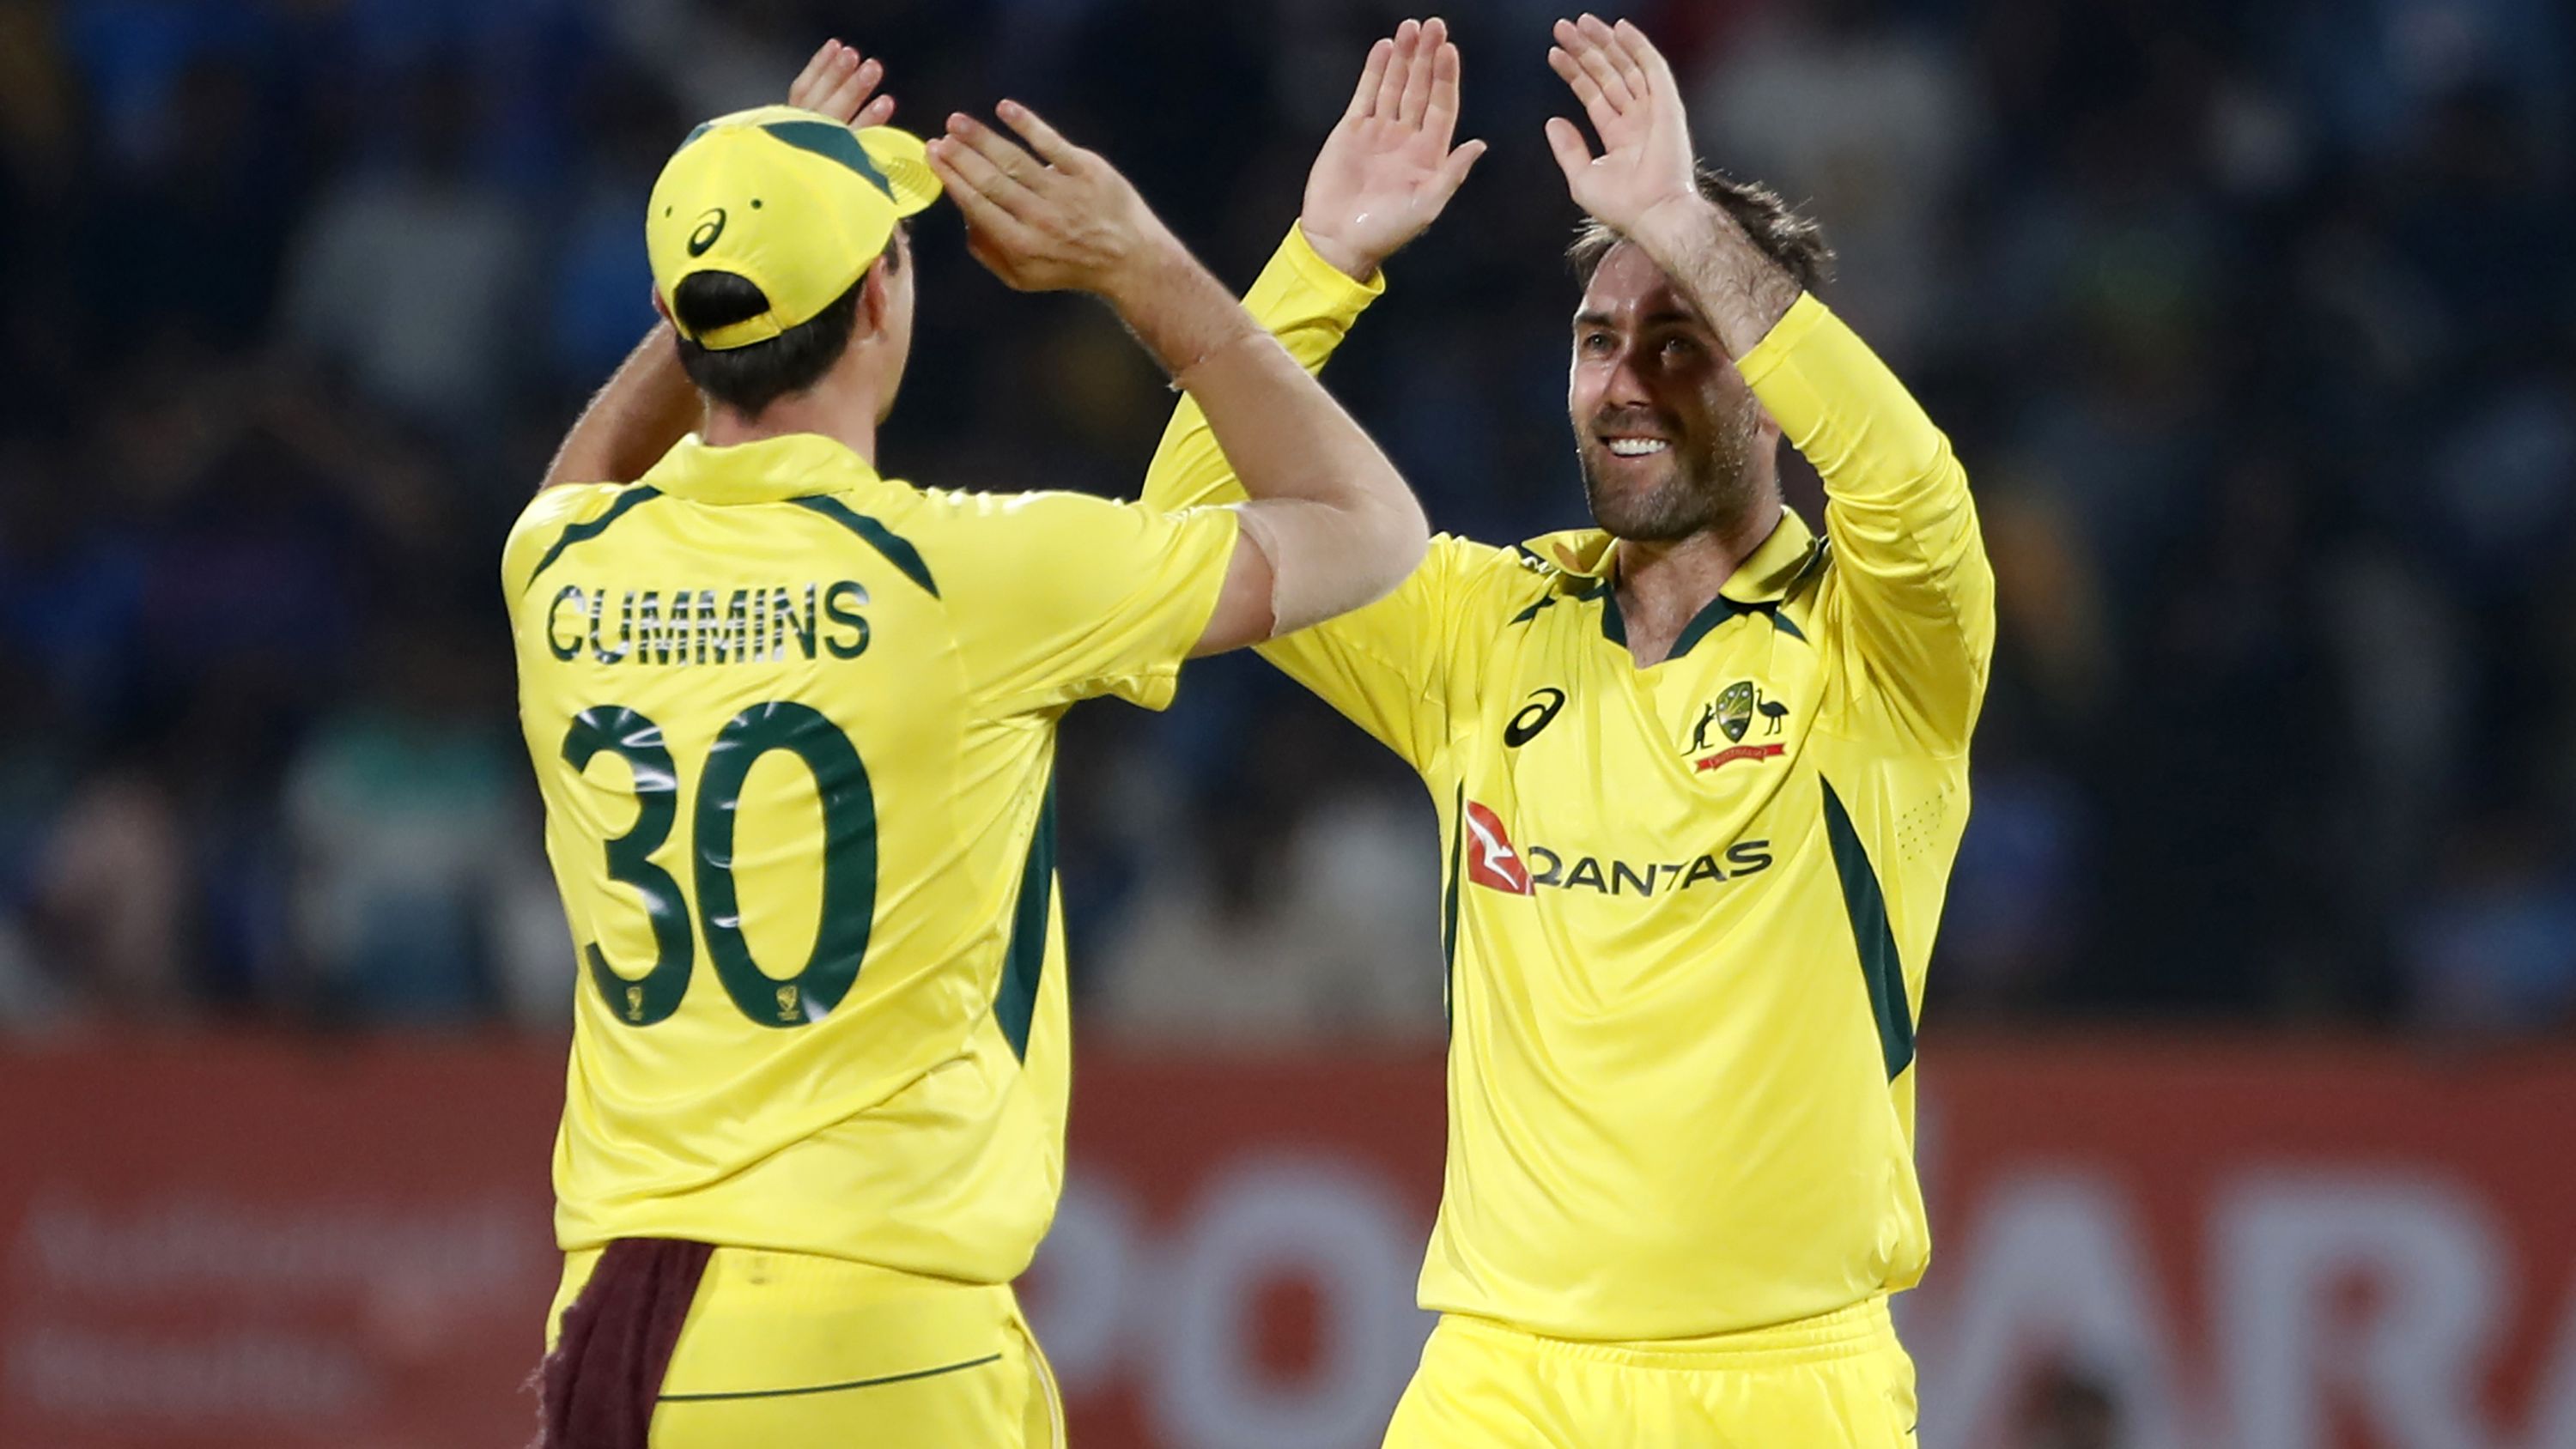 Glenn Maxwell rescues Aussies again to score much-needed win in World Cup warm-up match